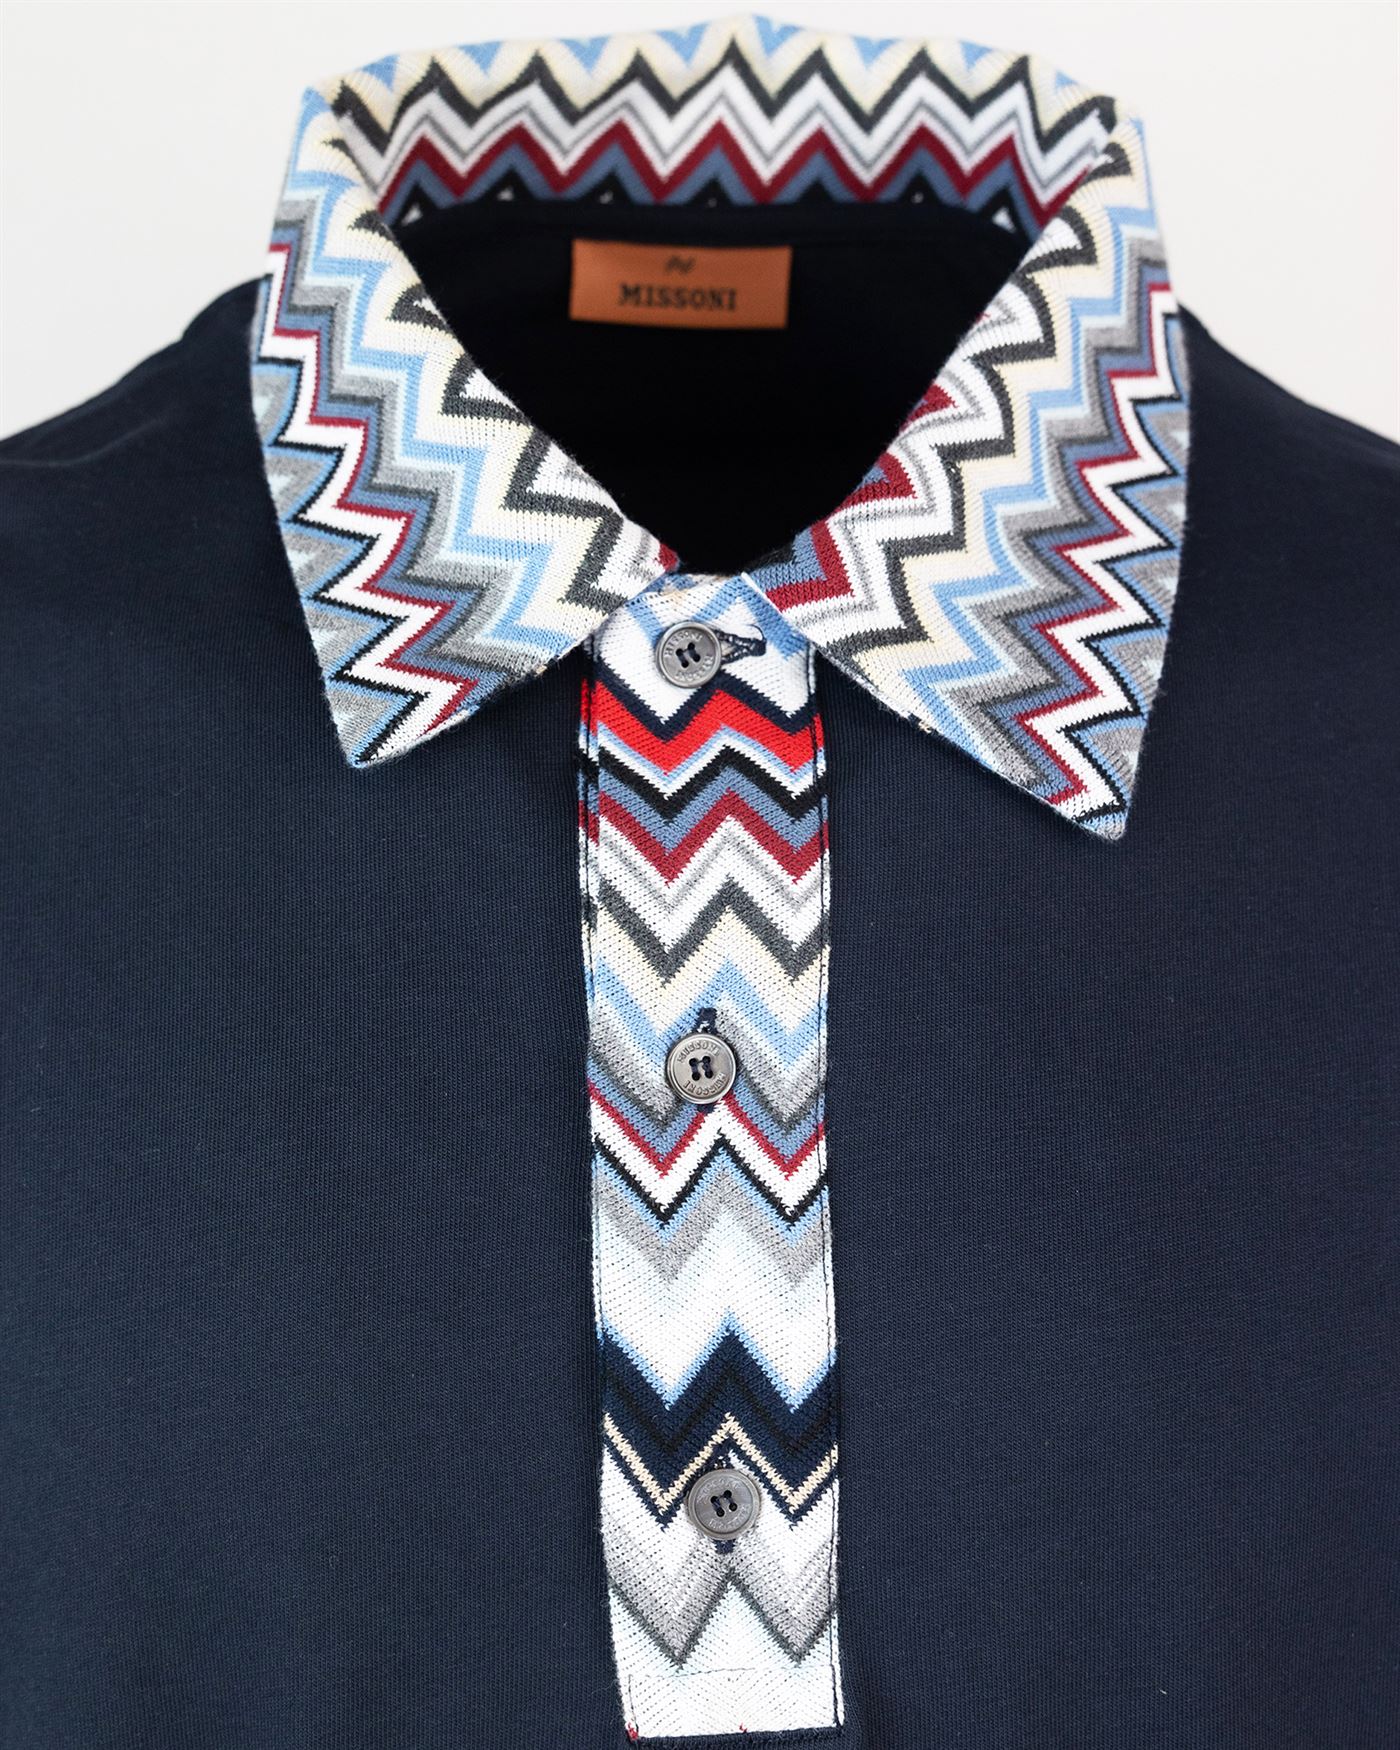 Shop Missoni Polo Shirt With Patterned Collar In Bj00iks72du